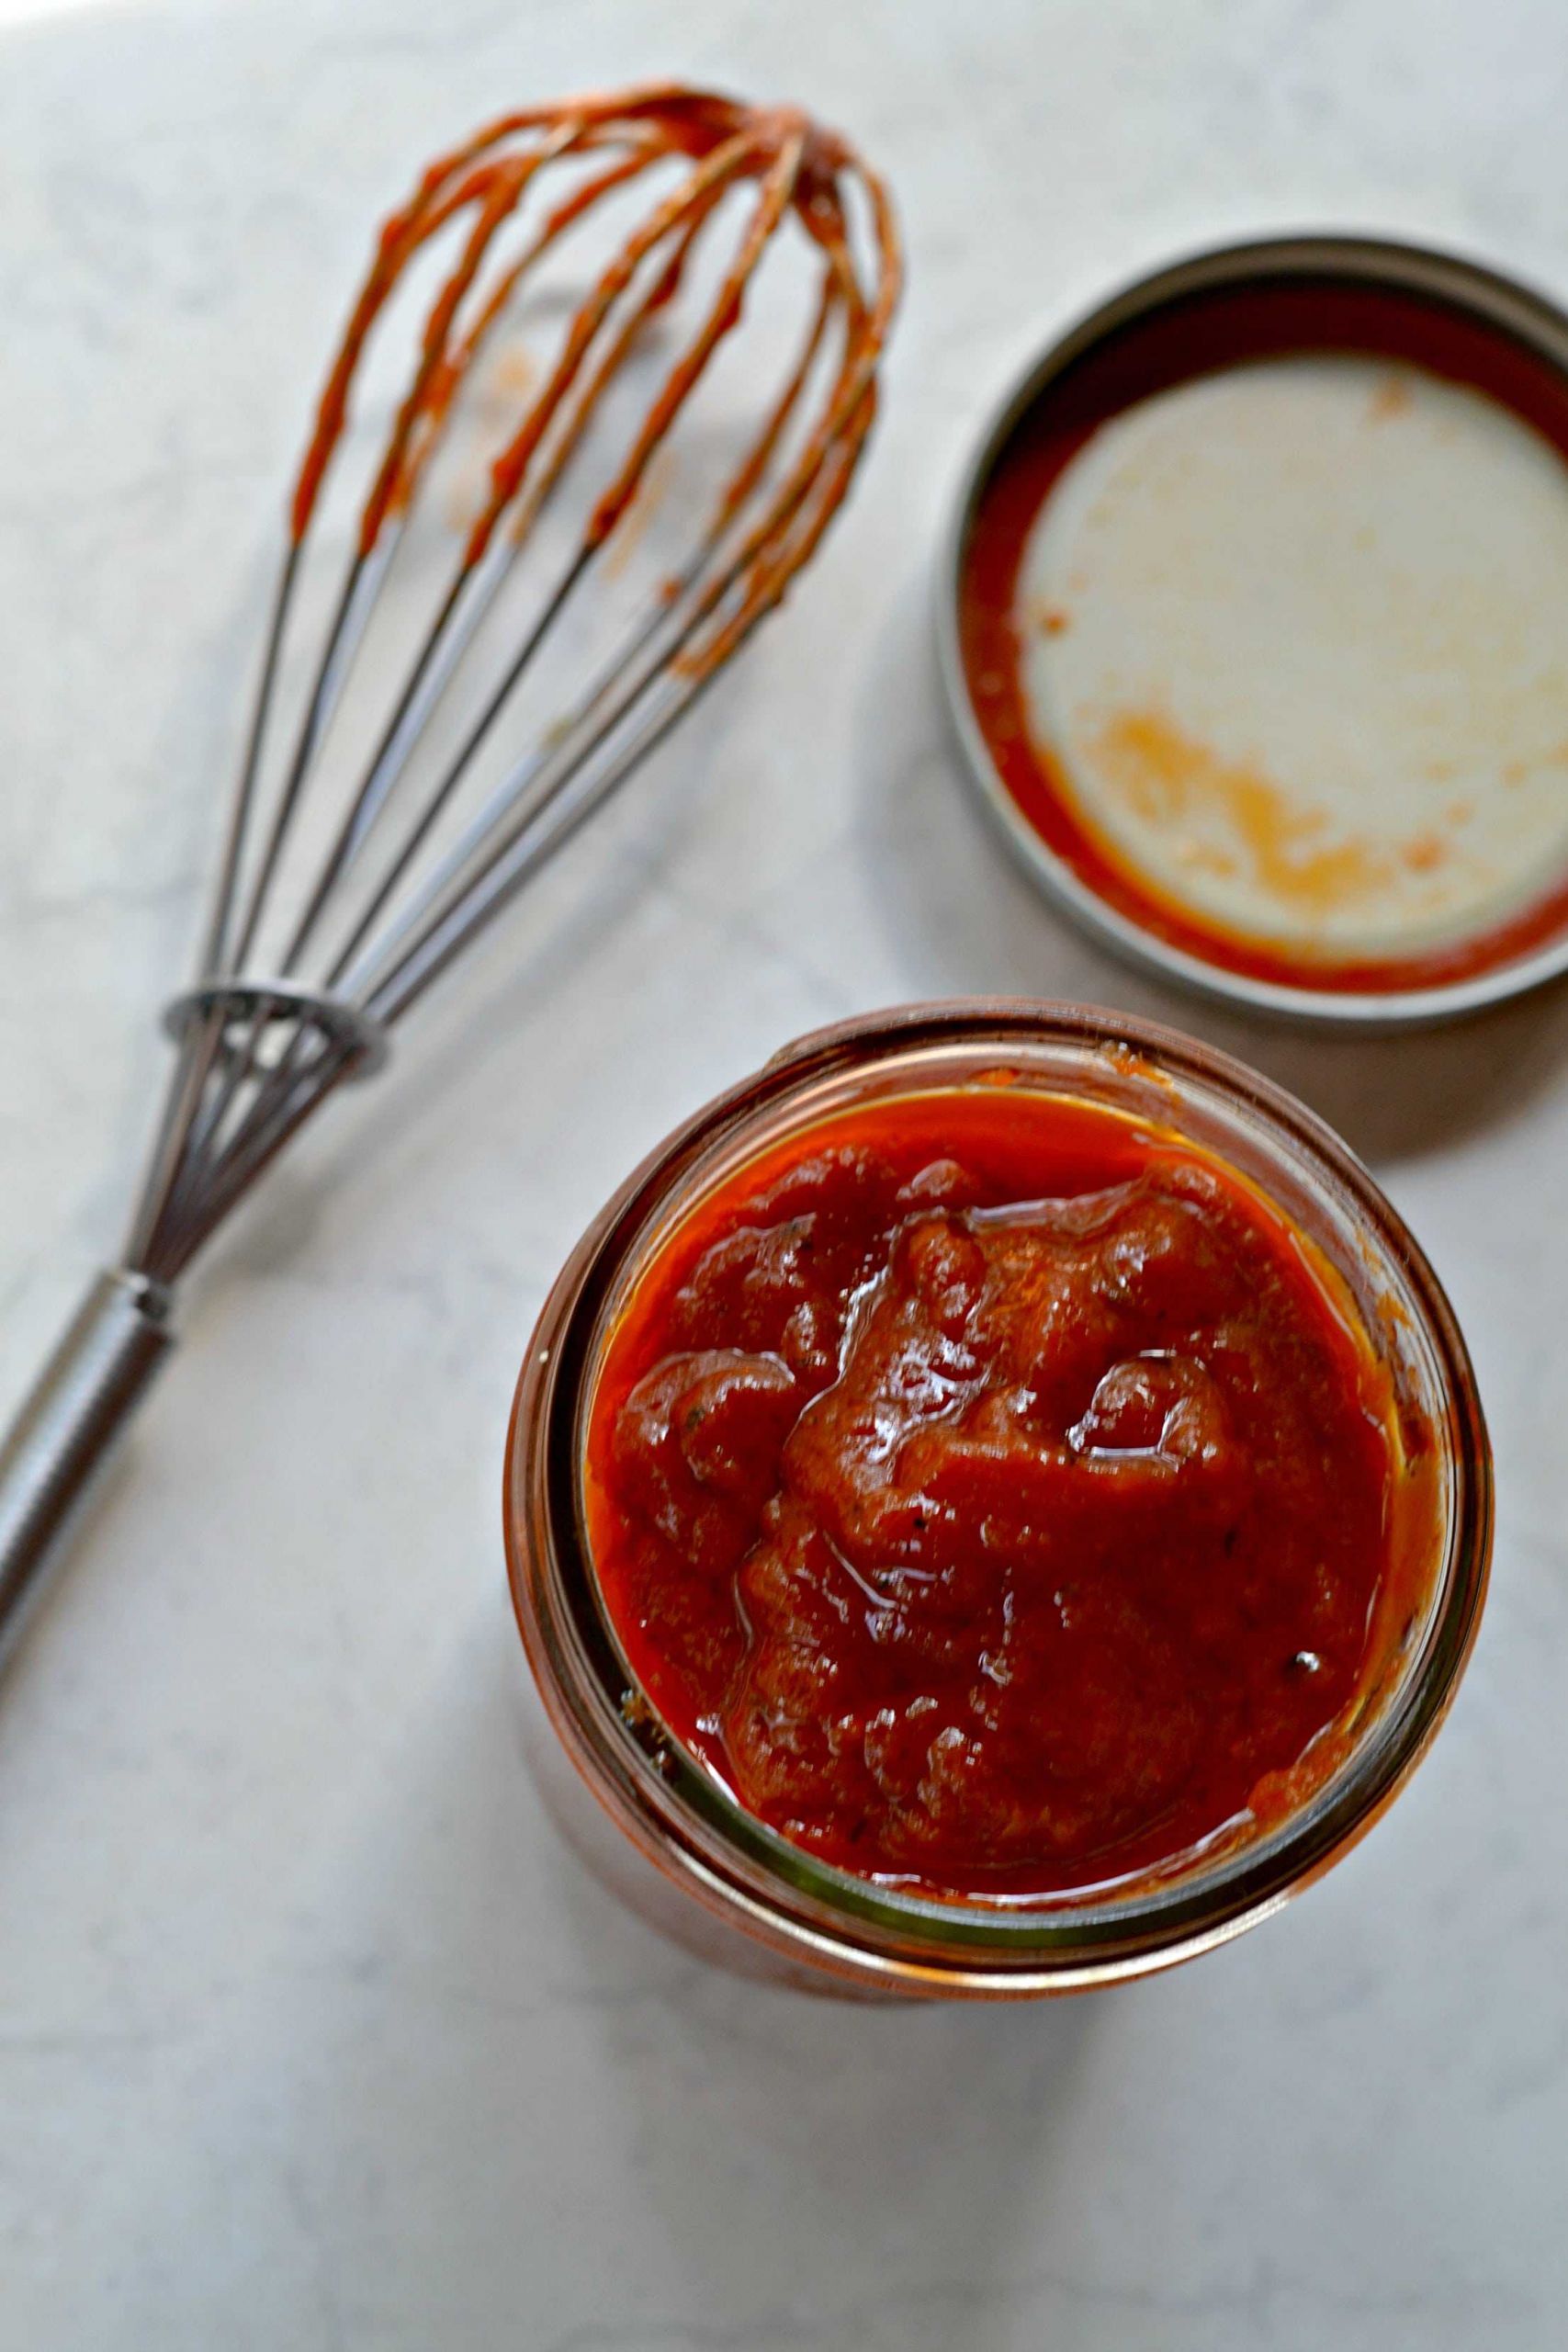 Homemade Pizza Sauce with tomato Sauce Lovely Easy Pizza Sauce From tomato Paste 4 Hats and Frugal